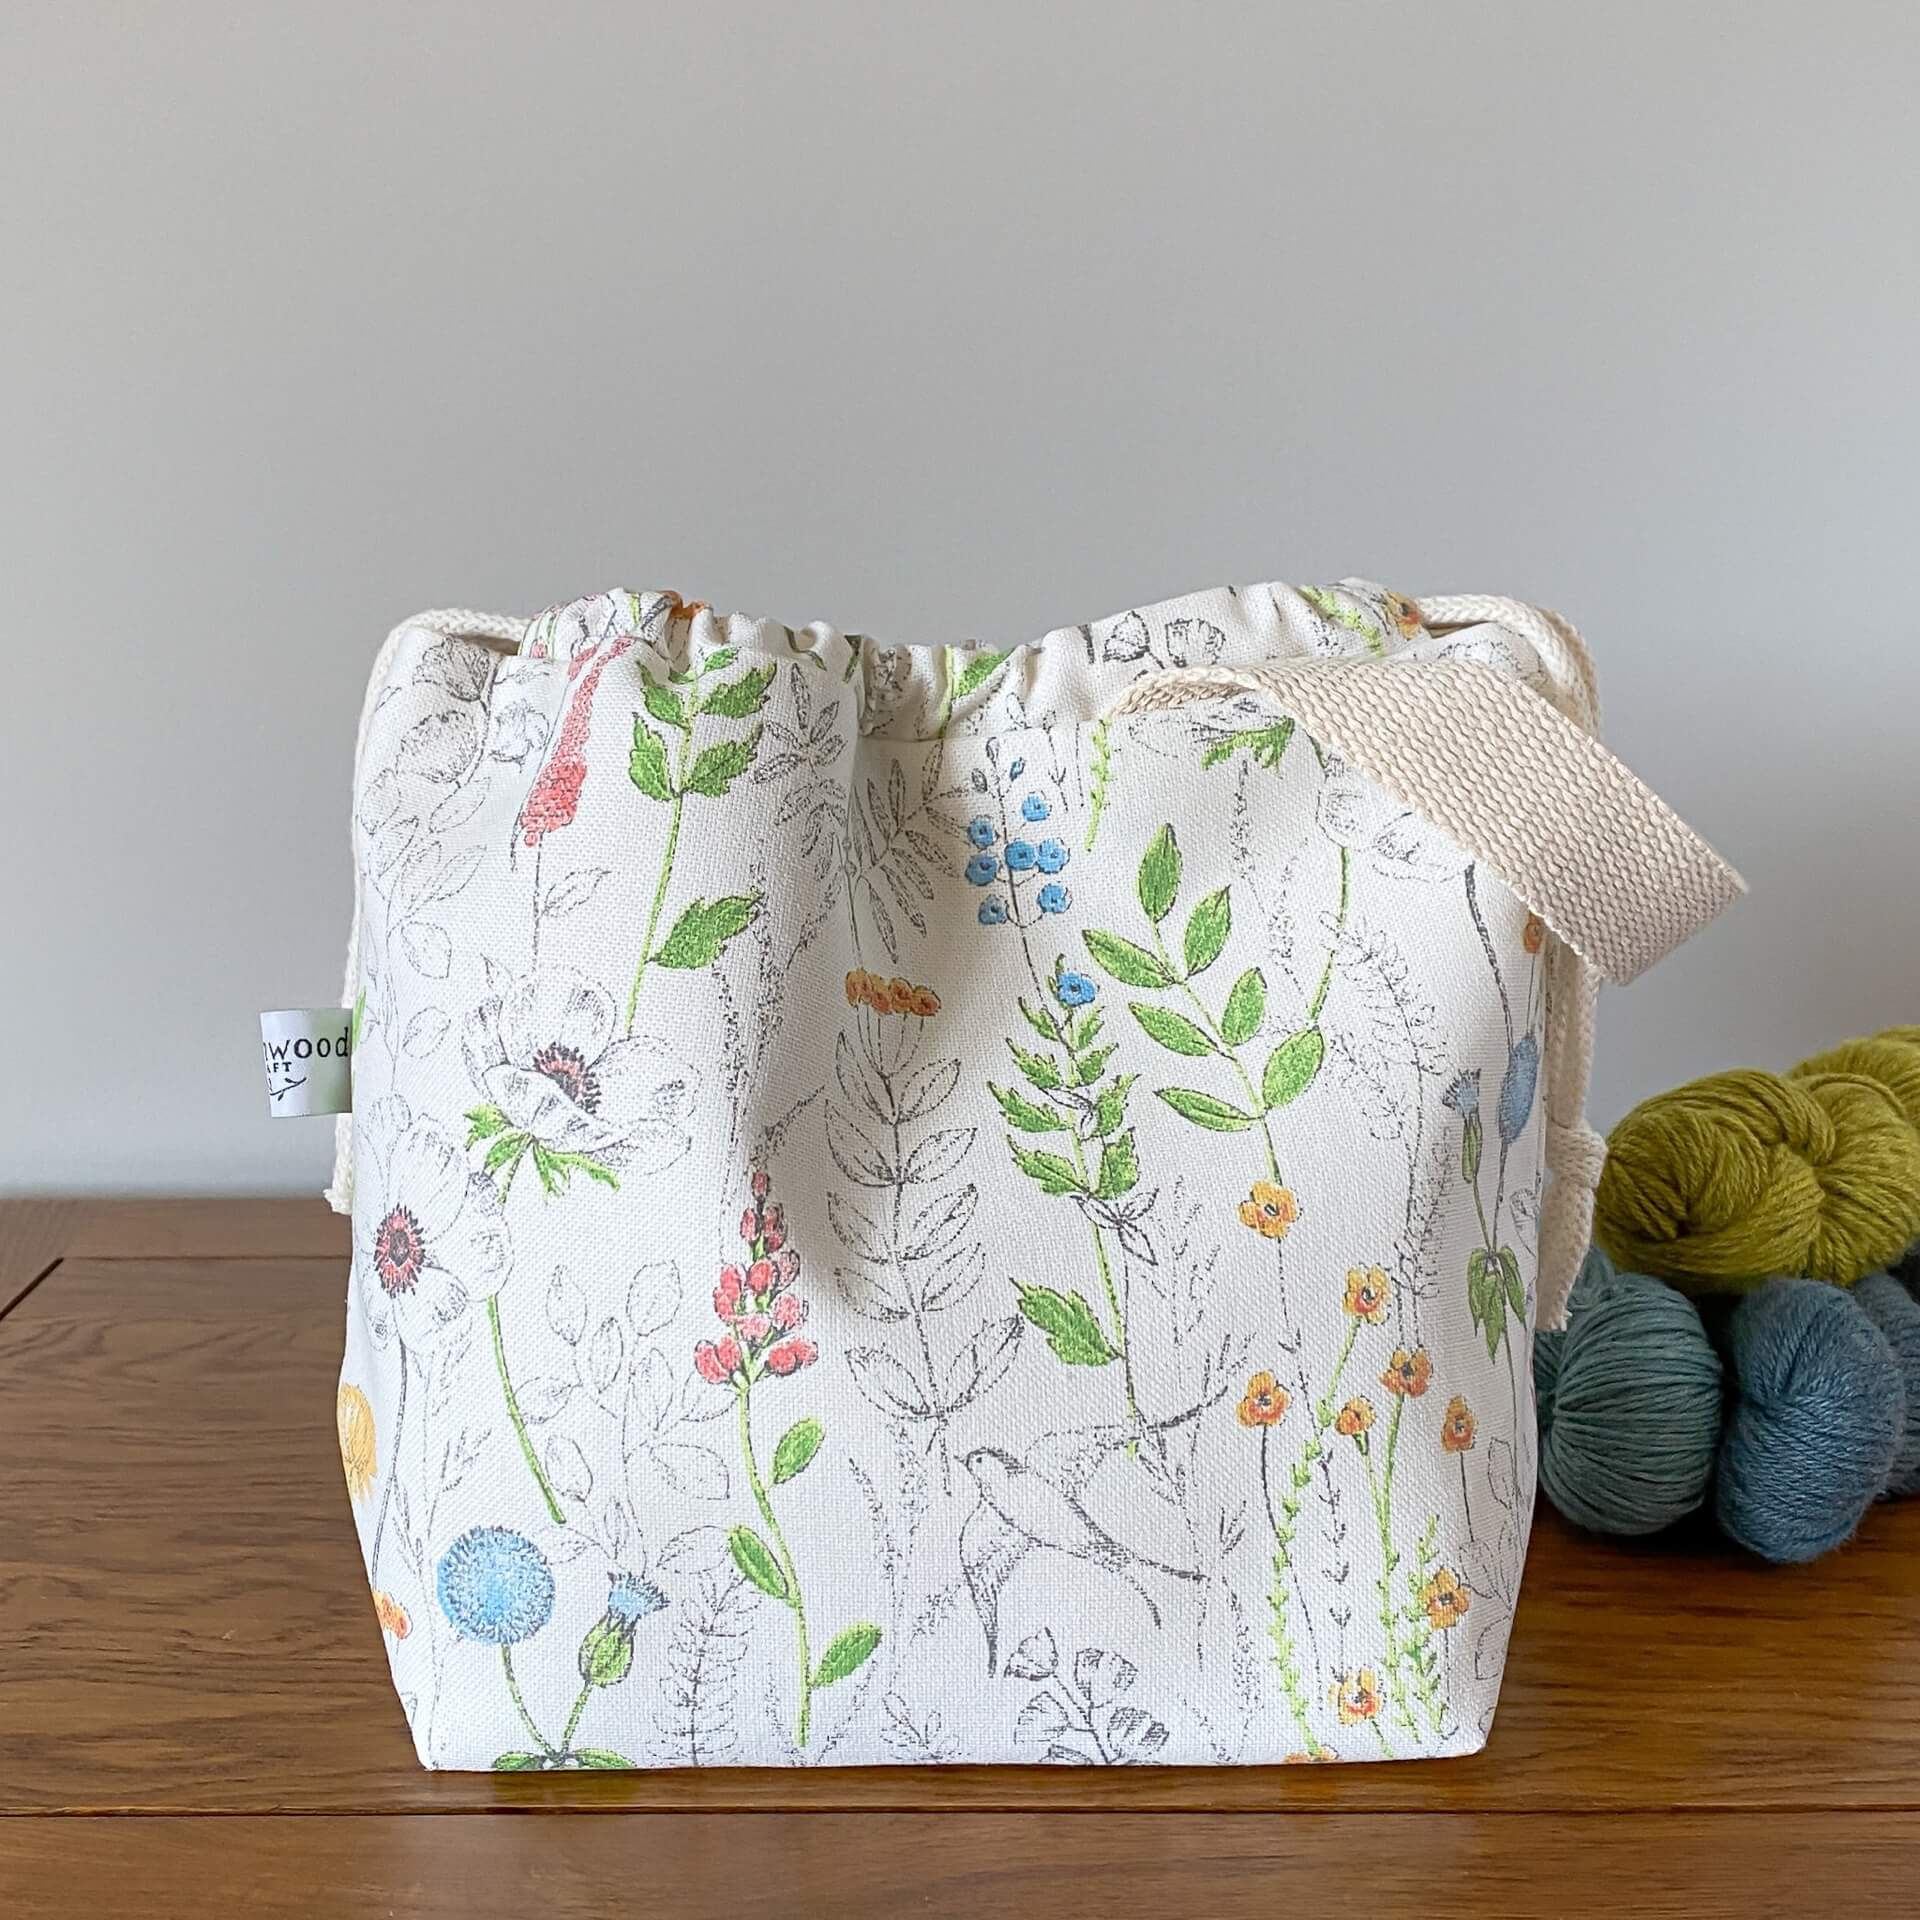 A pretty summery drawstring bag used for knitting and crochet projects sits on a wooden table next to three skeins of yarn. The bag is hand made from a print that shows wild flowers and birds. 